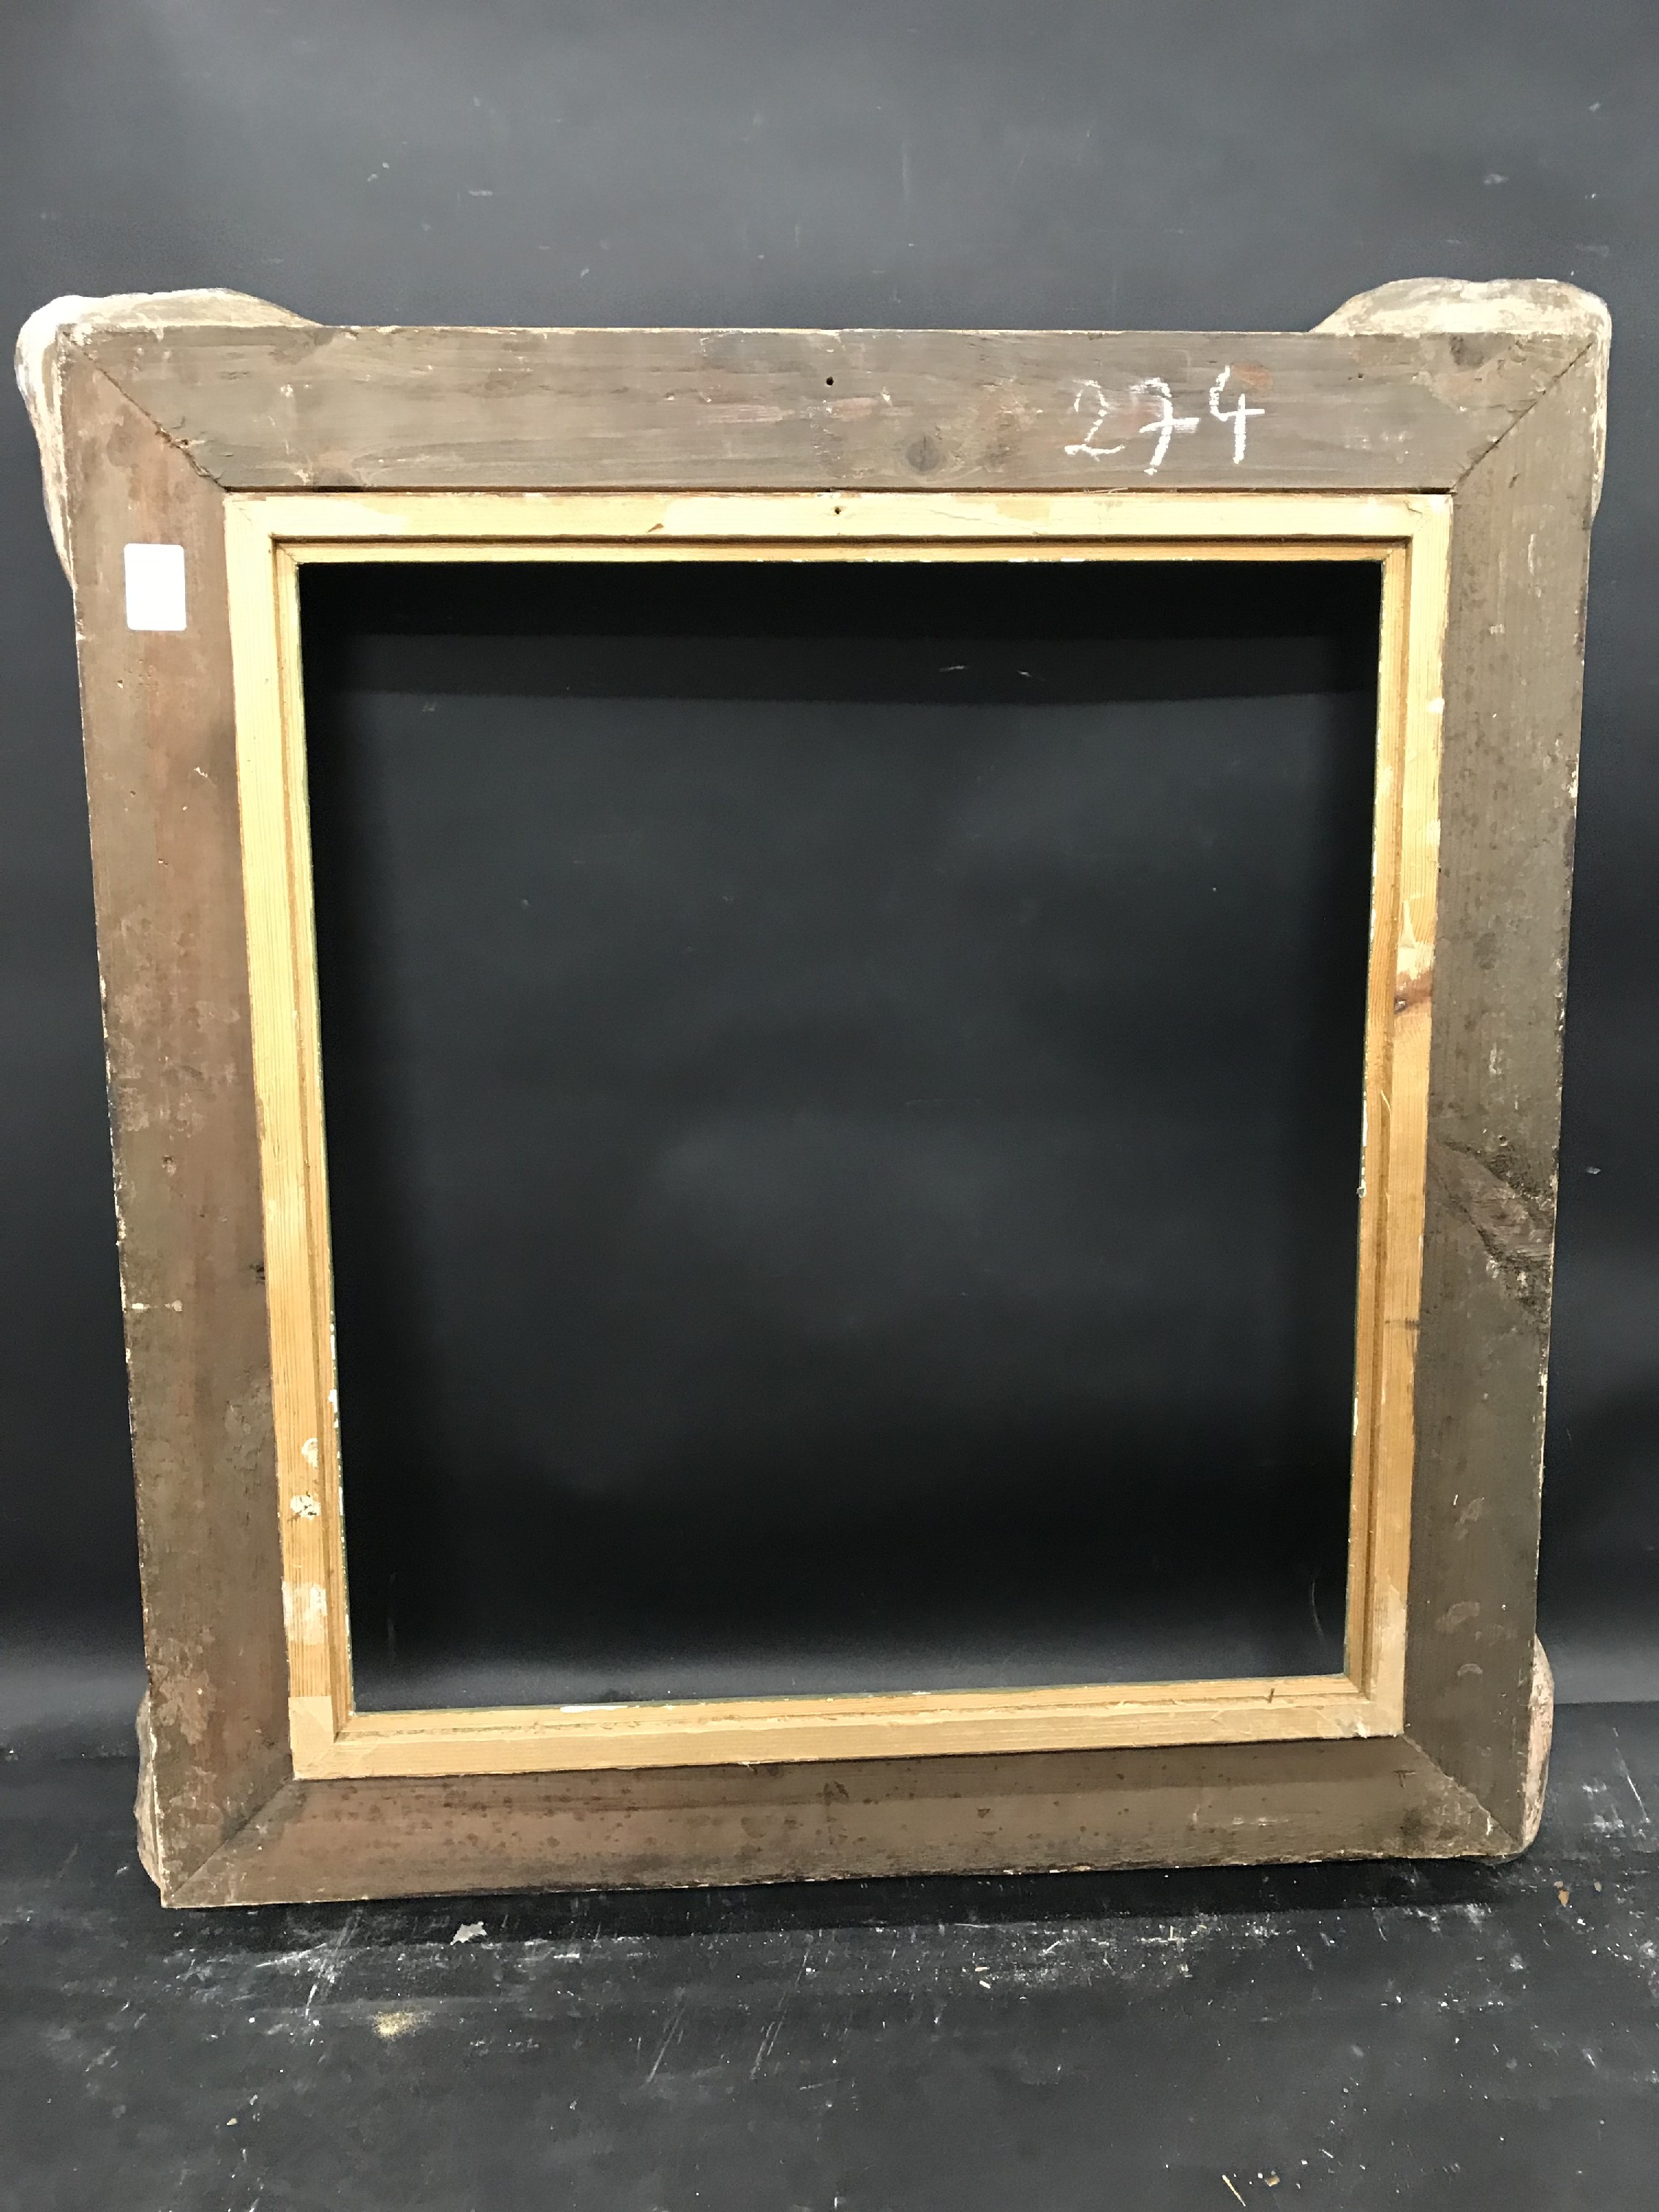 20th Century European School. A Painted Composition Frame, with Swept Corners, 19" x 17.25" ( - Image 3 of 3